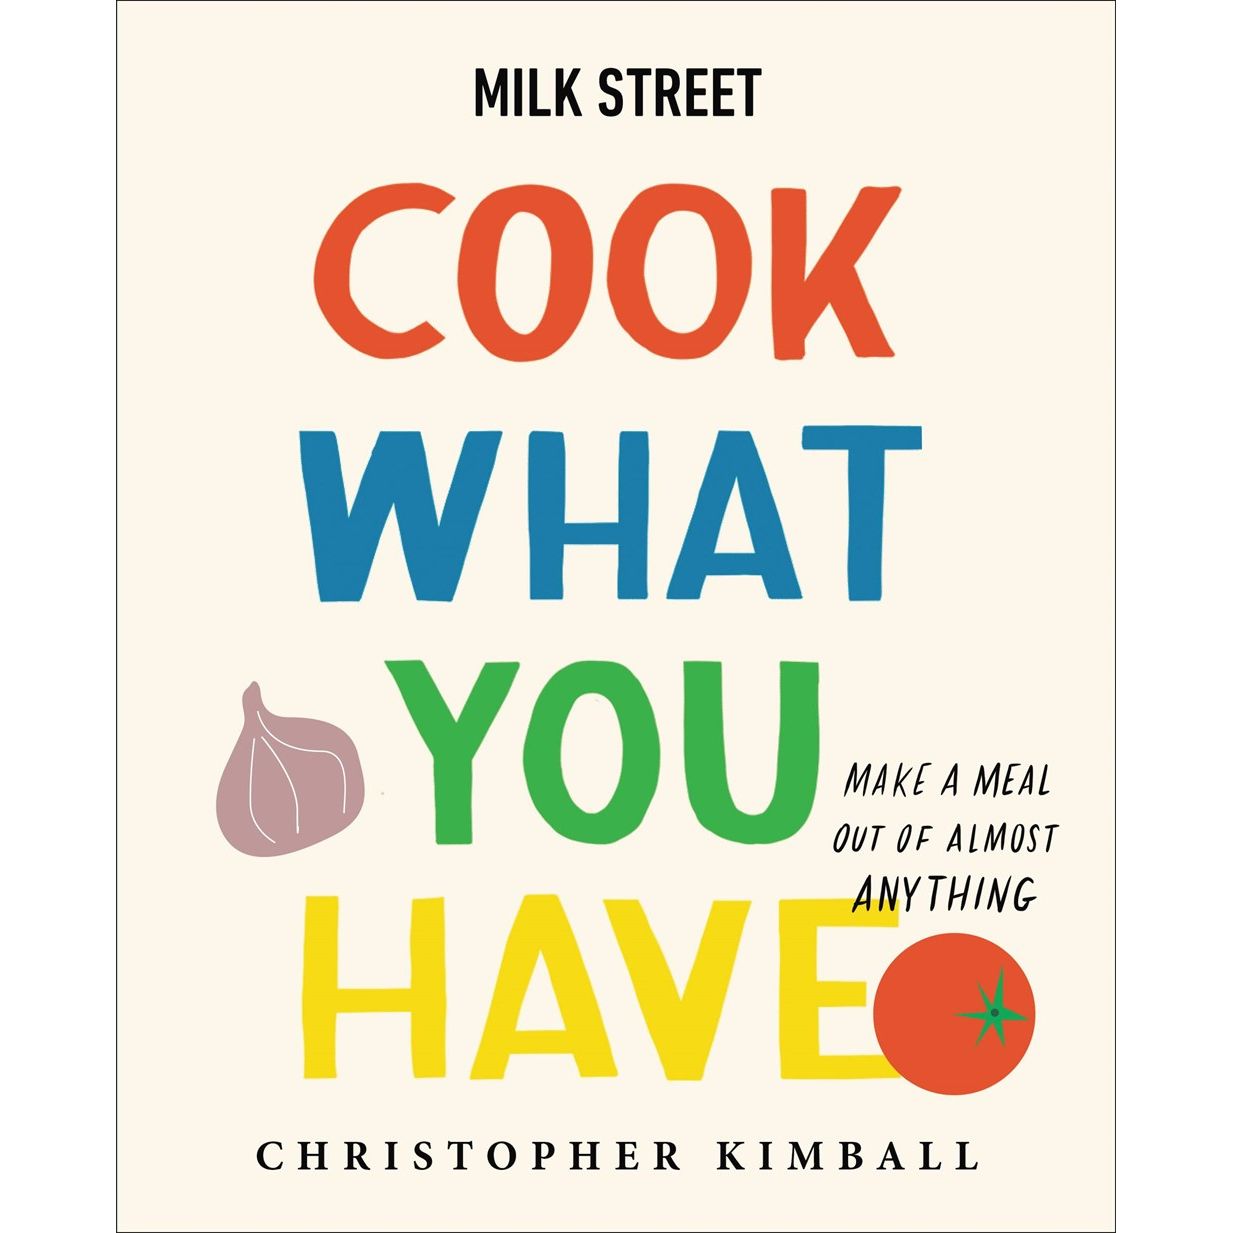 Milk Street: Cook What You Have (Christopher Kimball)